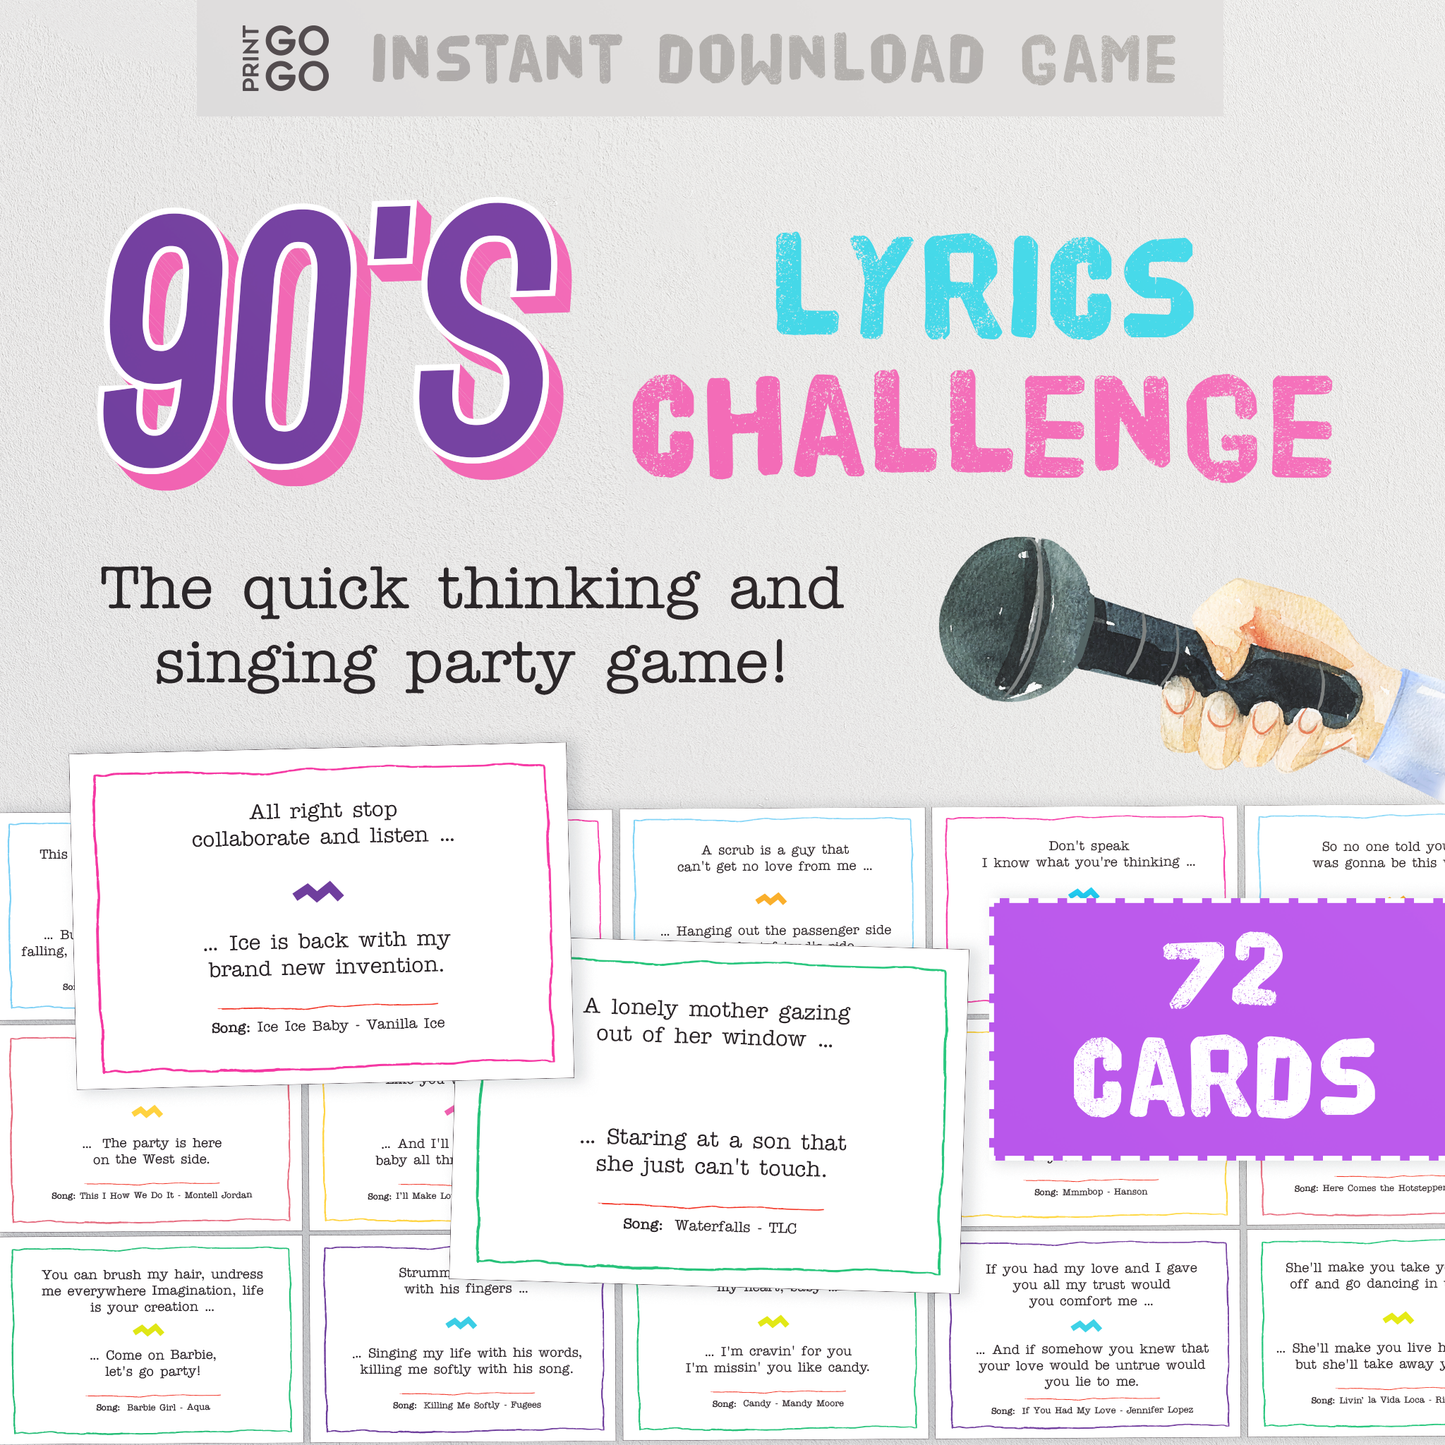 90s Songs Lyrics Challenge Game - The Quick Thinking and Singing Family Party Game